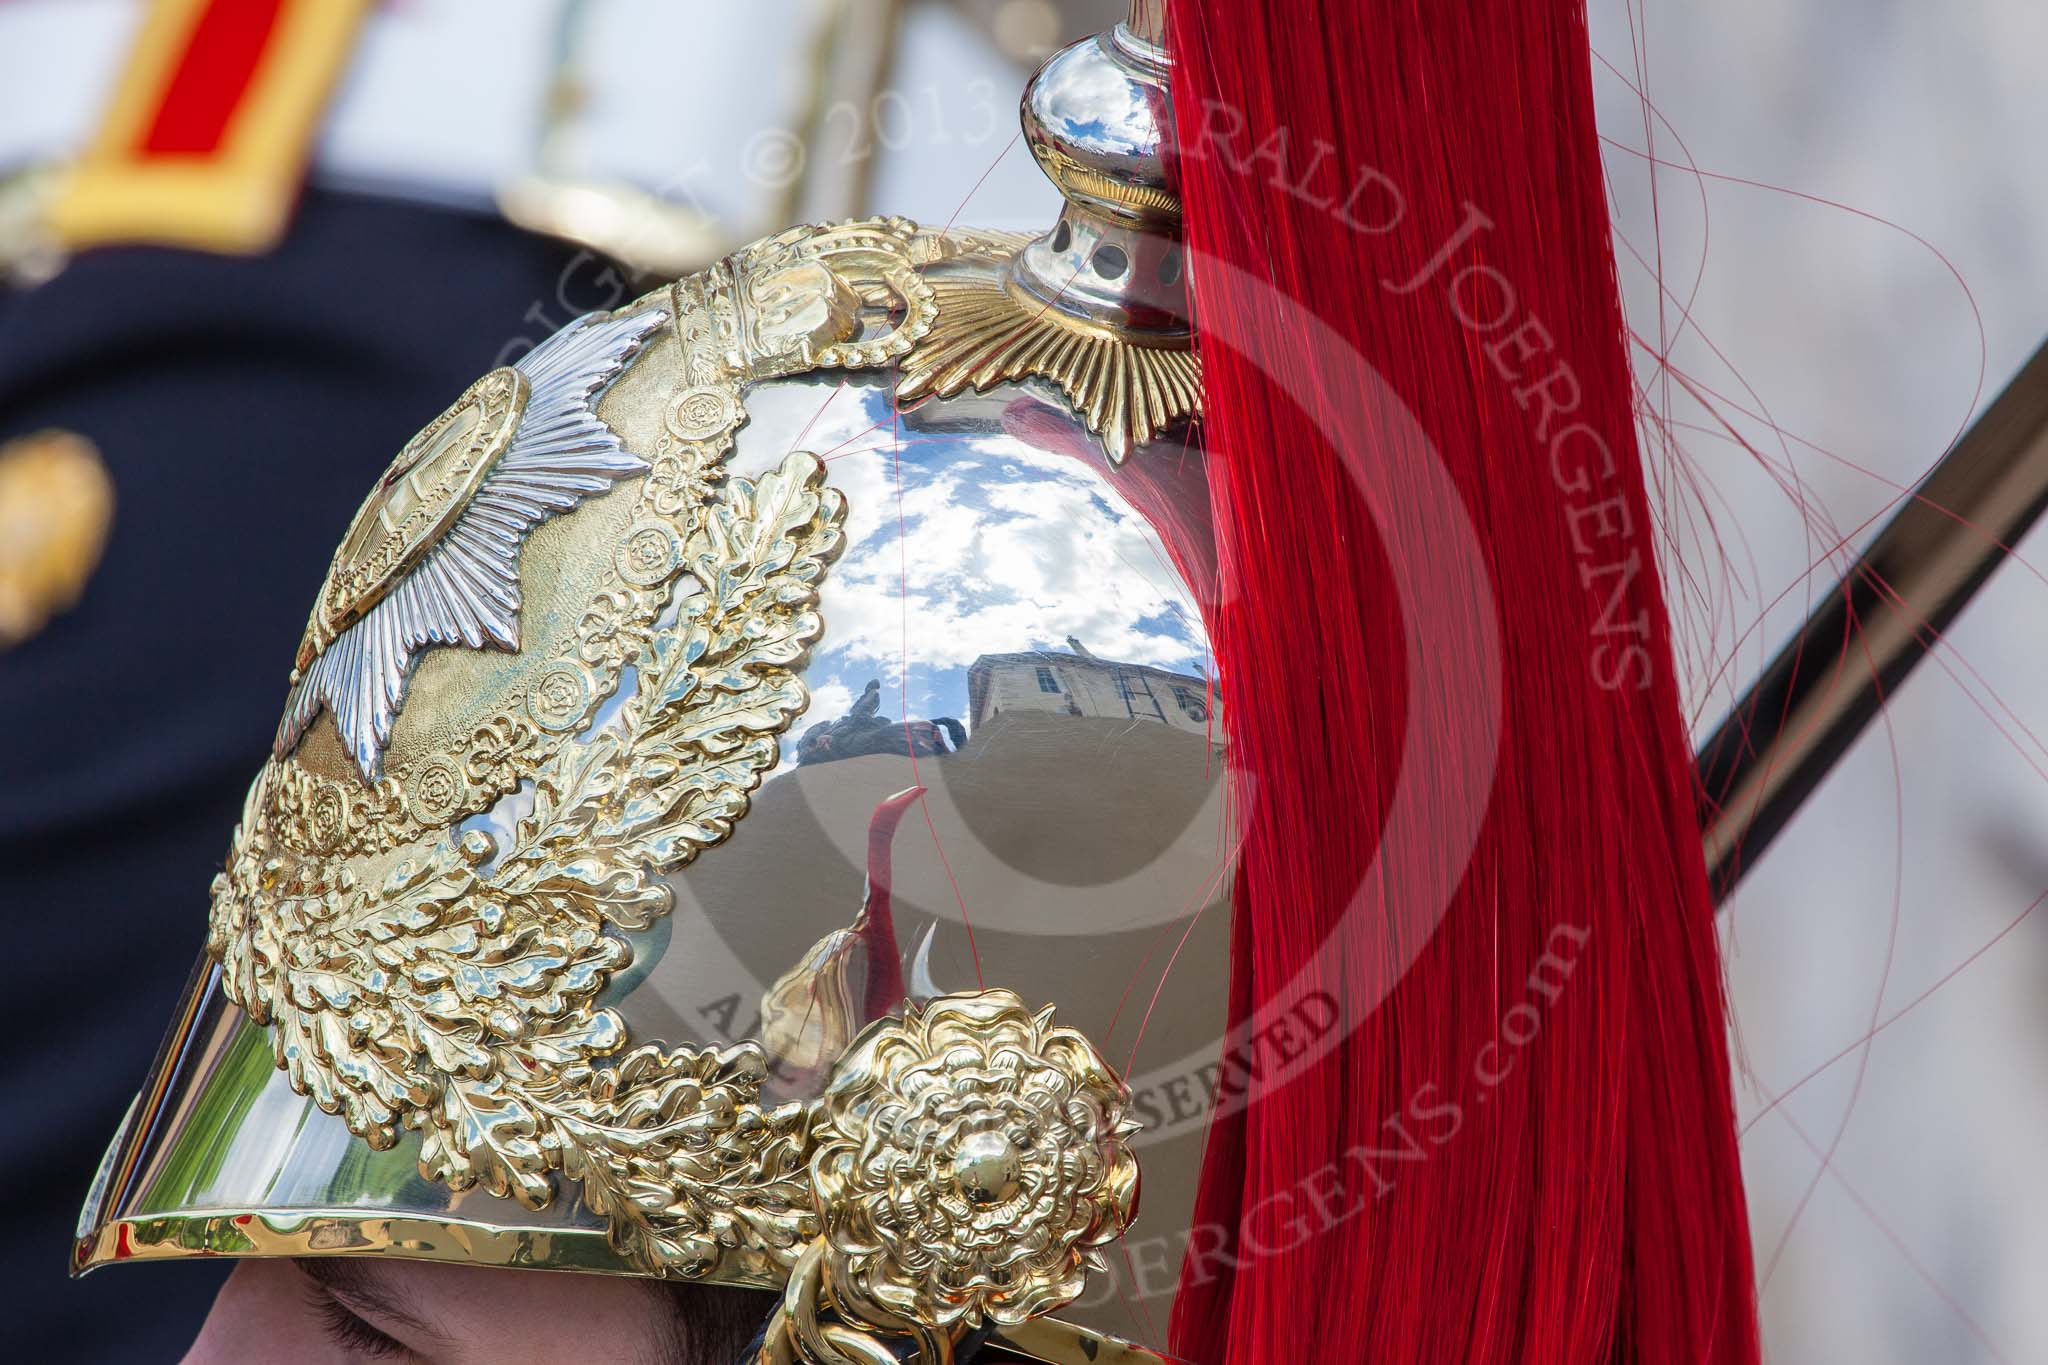 Trooping the Colour 2013: Reflection of the immaculate helmet of one of the four troopers from the Blues and Royals that are part of the Royal Procession. Image #521, 15 June 2013 11:31 Horse Guards Parade, London, UK